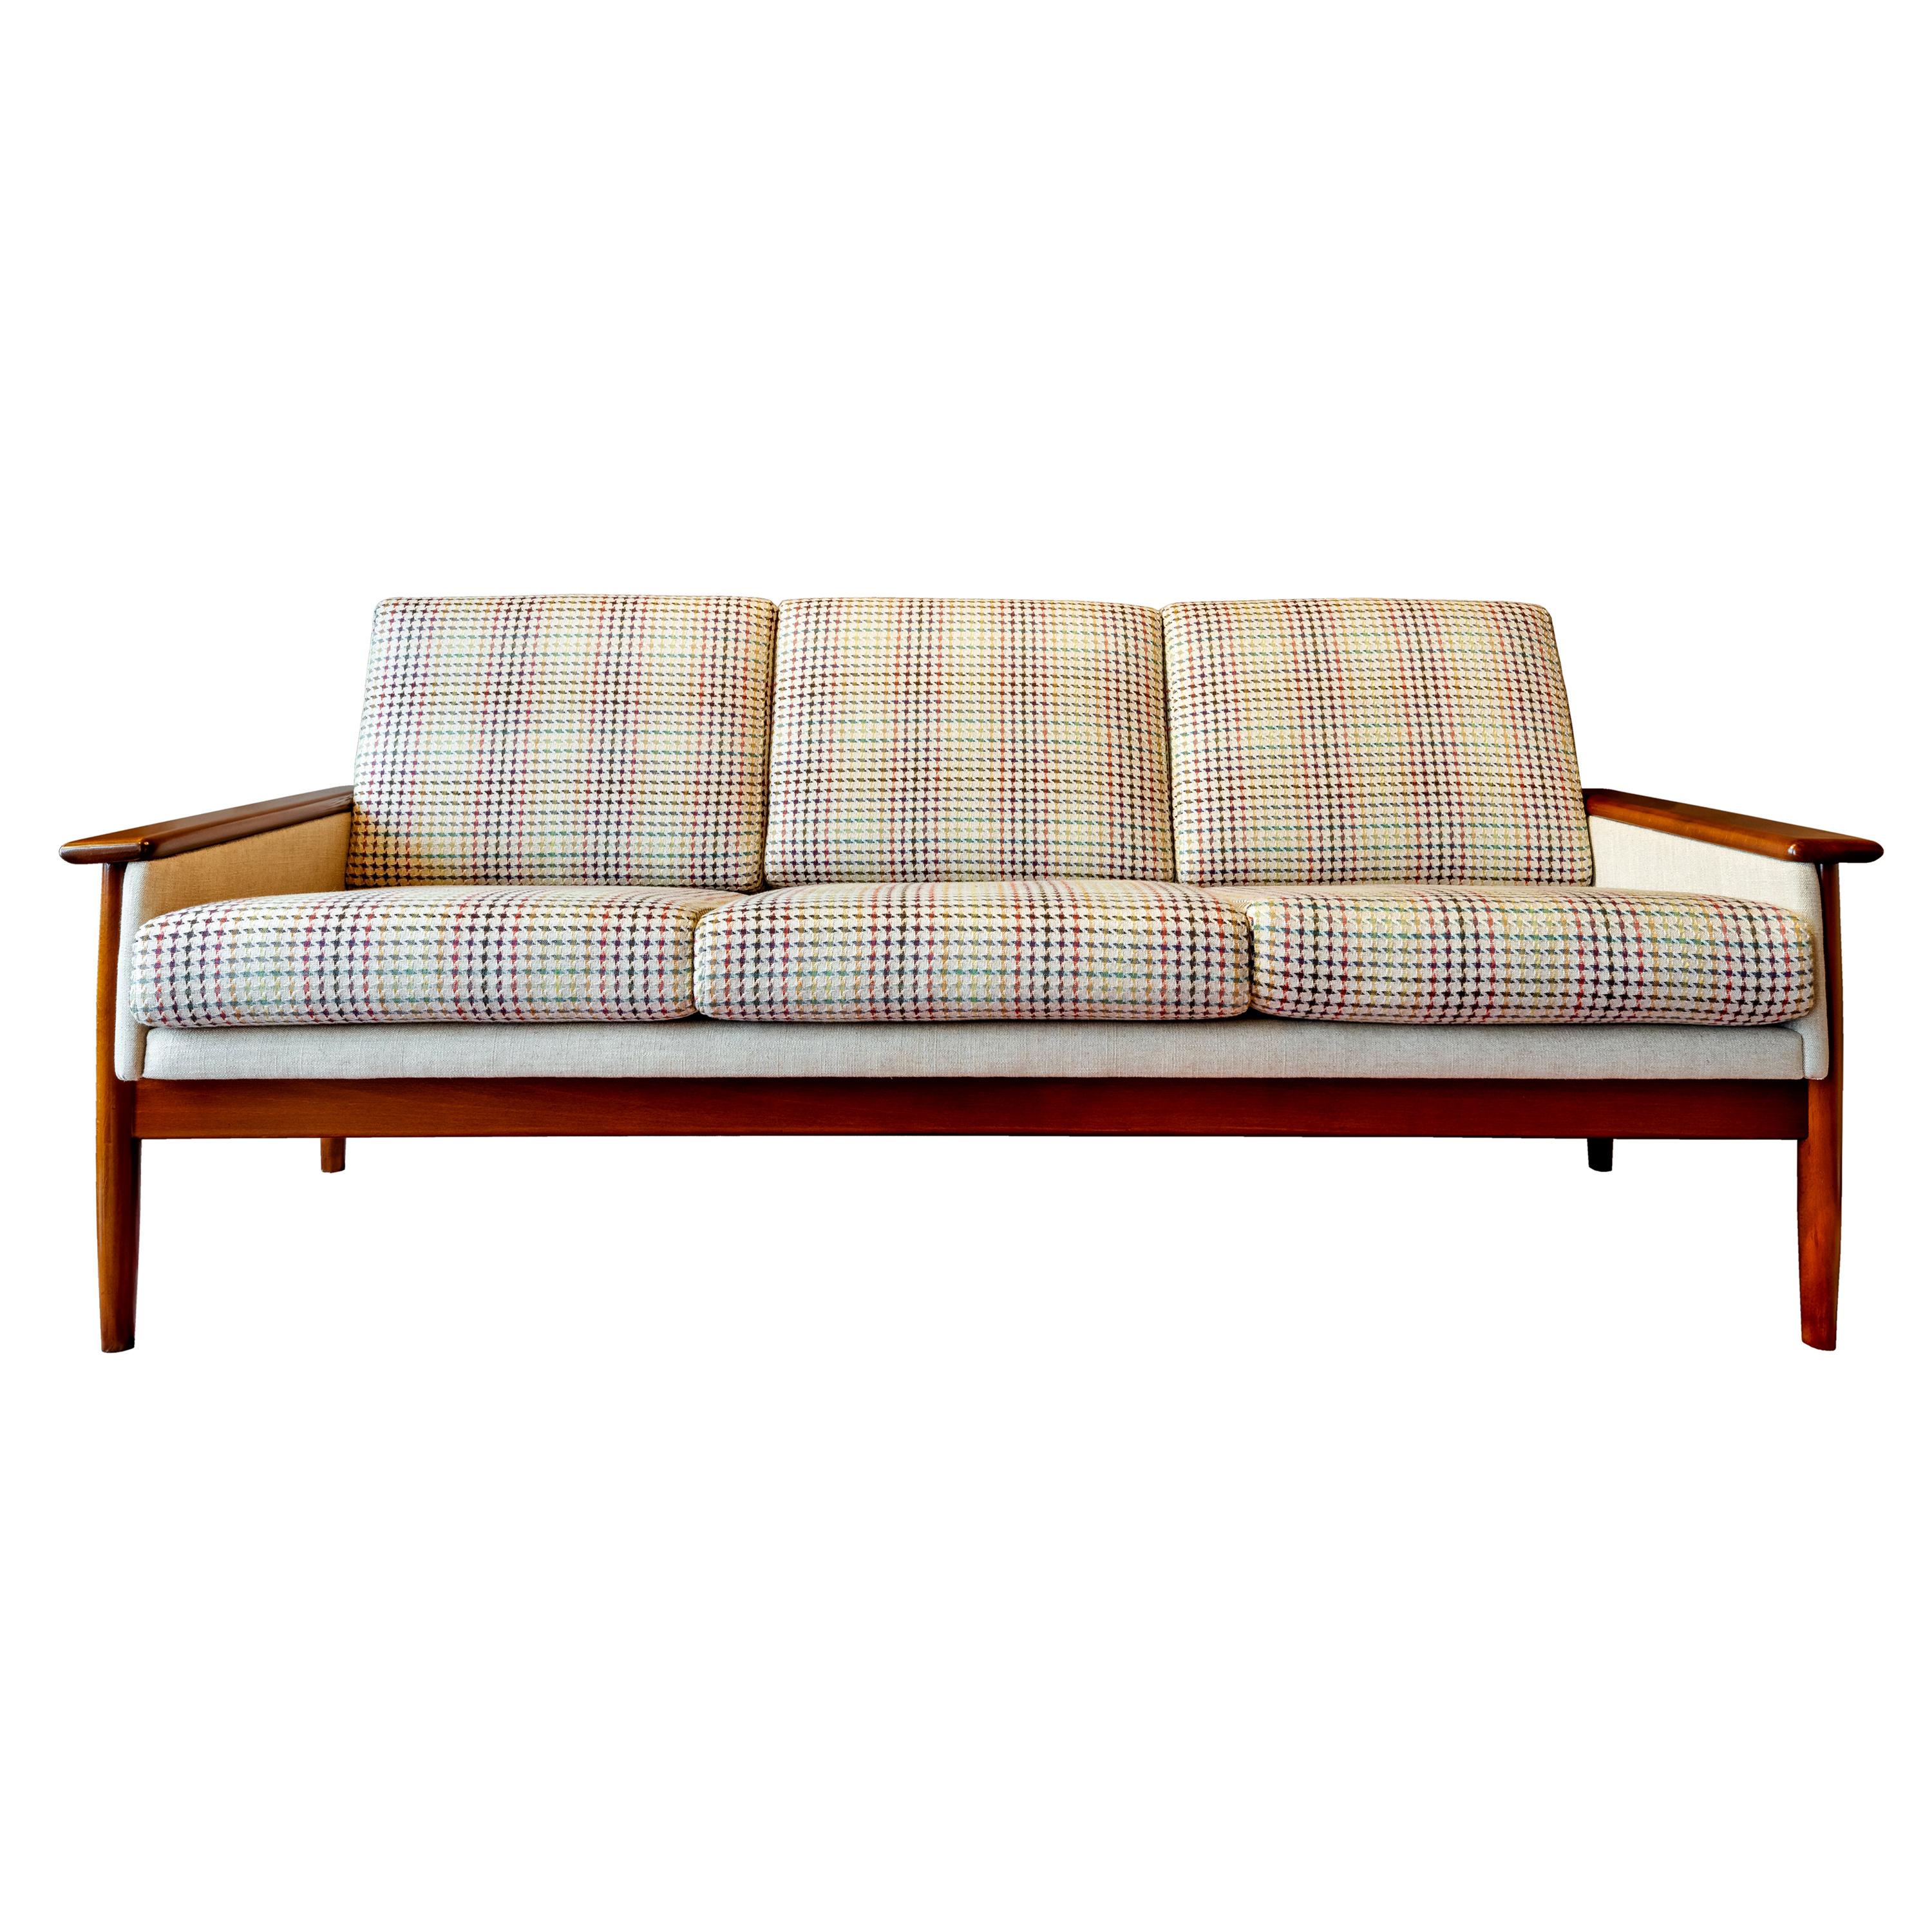 Mid-Century Modern sofa set 3-seat and 2 lounge club chairs attributed to Knut Saeter for Vatne Mobler, 1960s

A stunning vintage teak three- seat sofa and two lounge club chairs, attributed to Knut Saeter for Vatne Mobler in Norway. Knut Saeter was